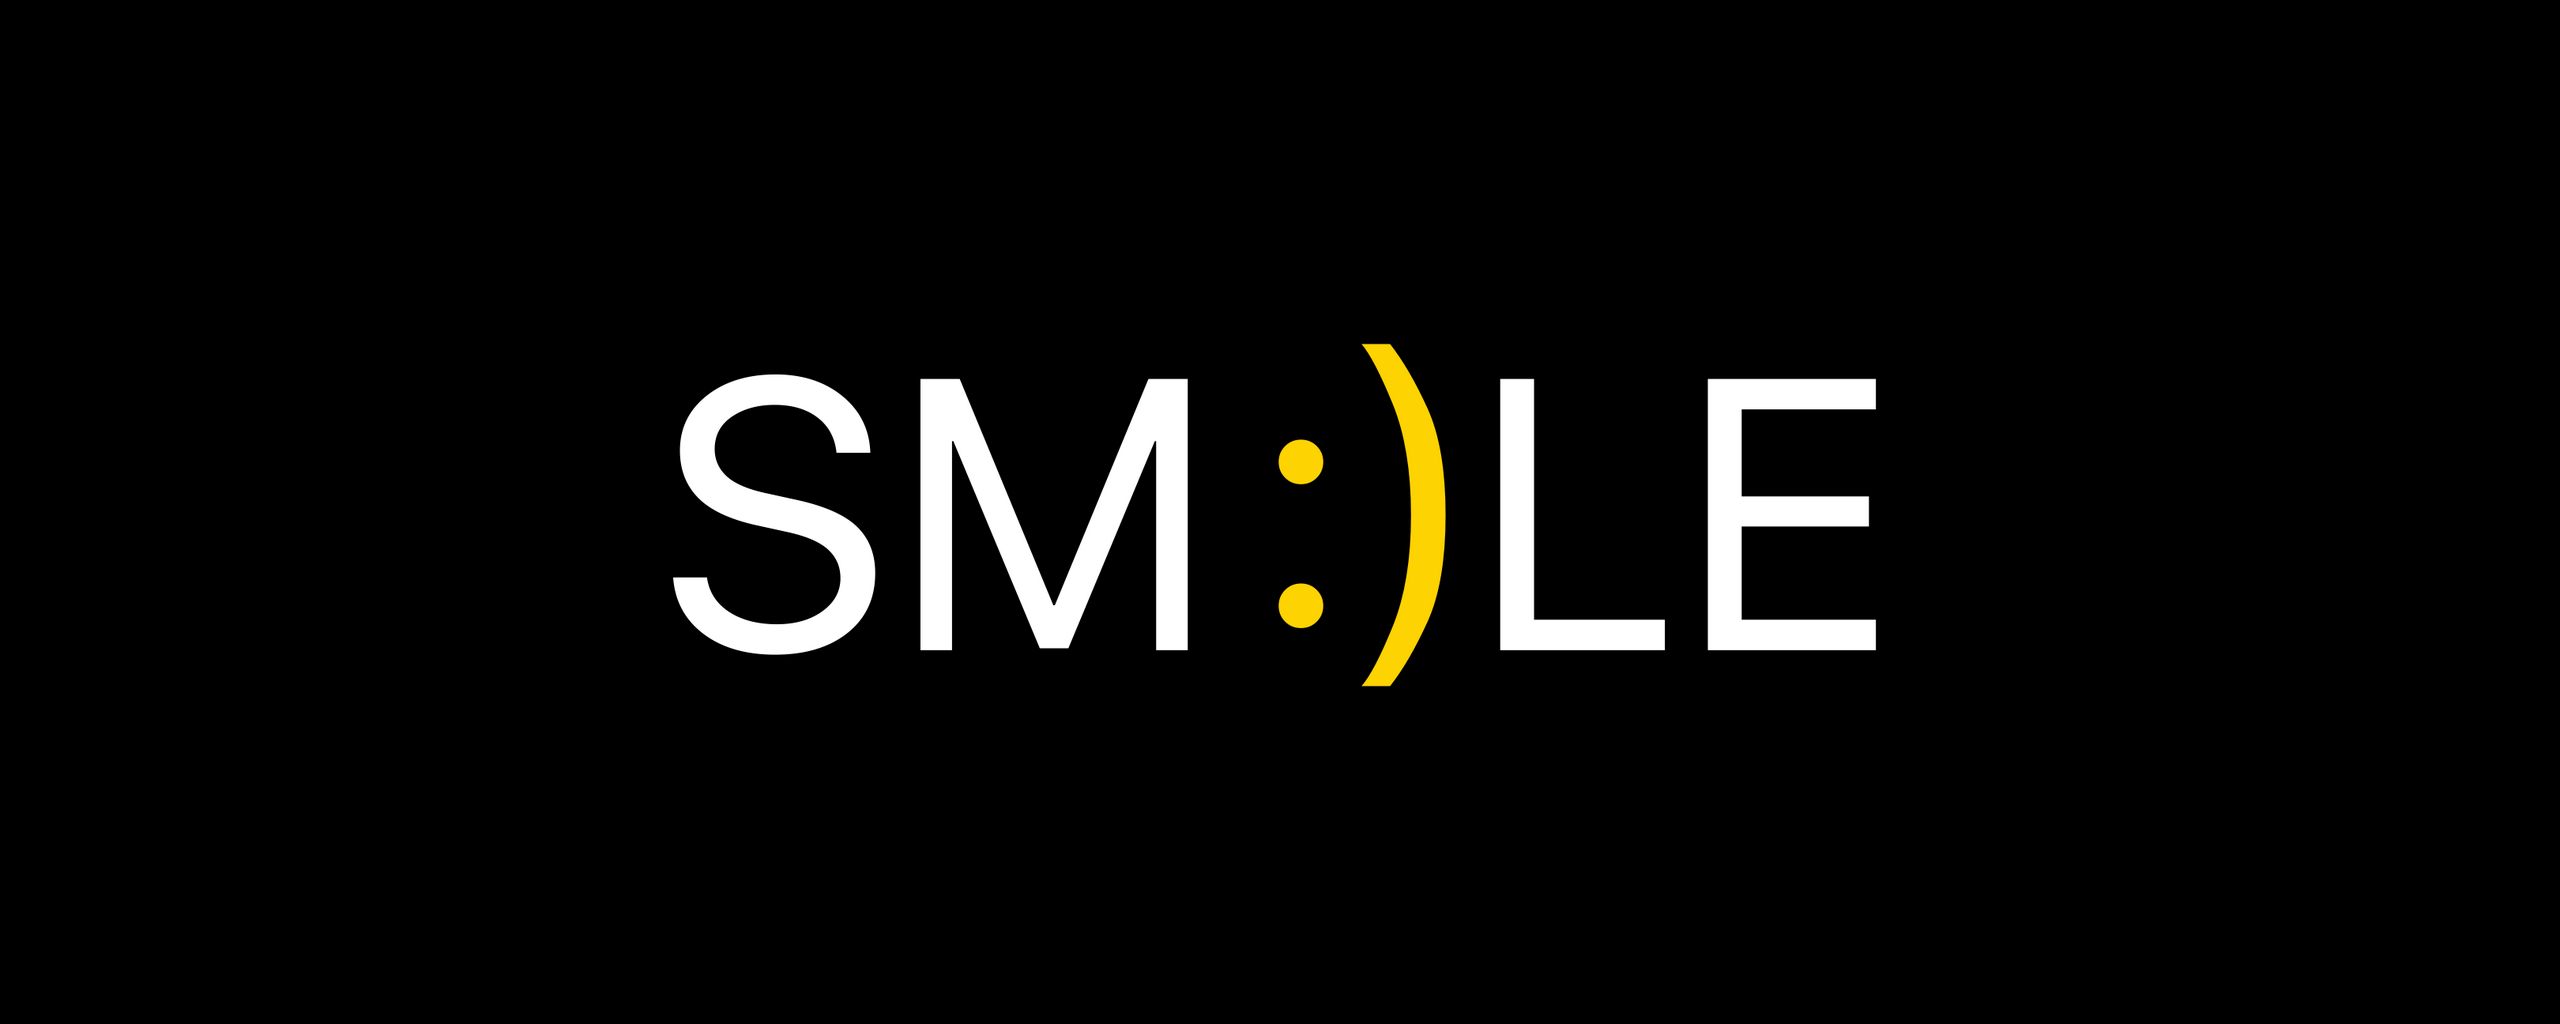 2560x1024 Wallpaper smile, positive, word, cheerful